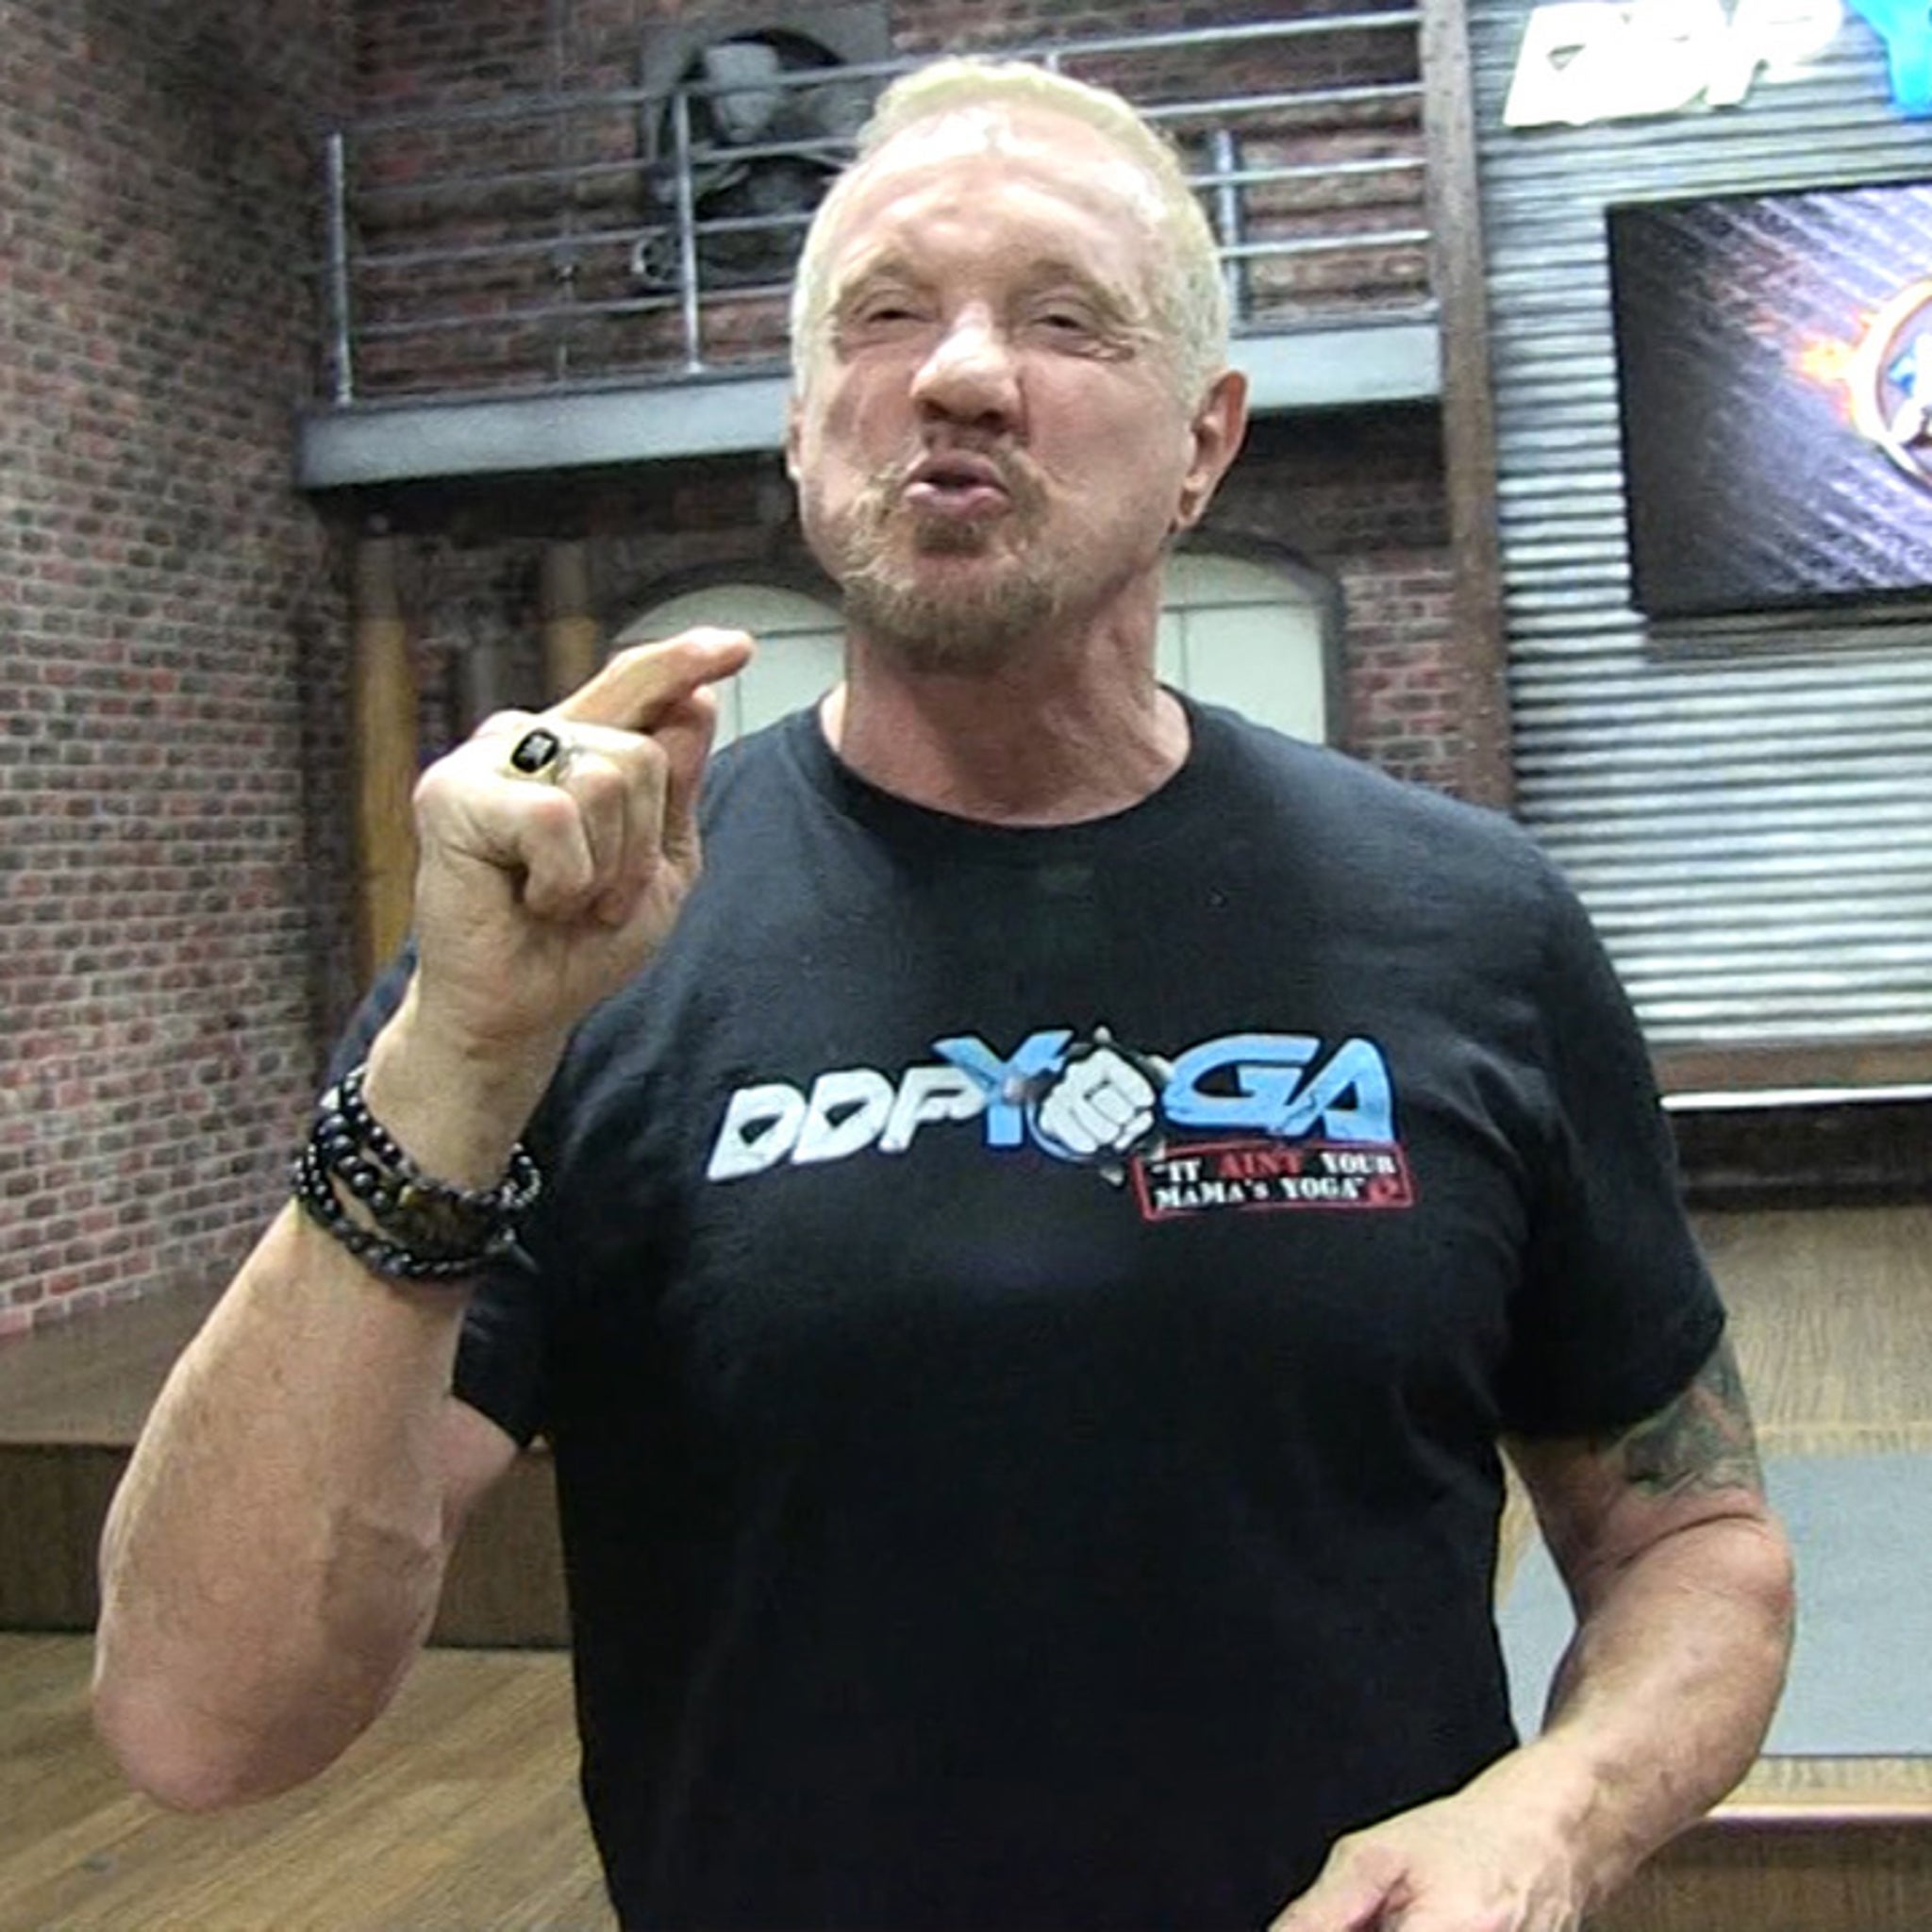 Diamond Dallas Page Let Hulk Hogan Back in WWE, Hes Not Racist!